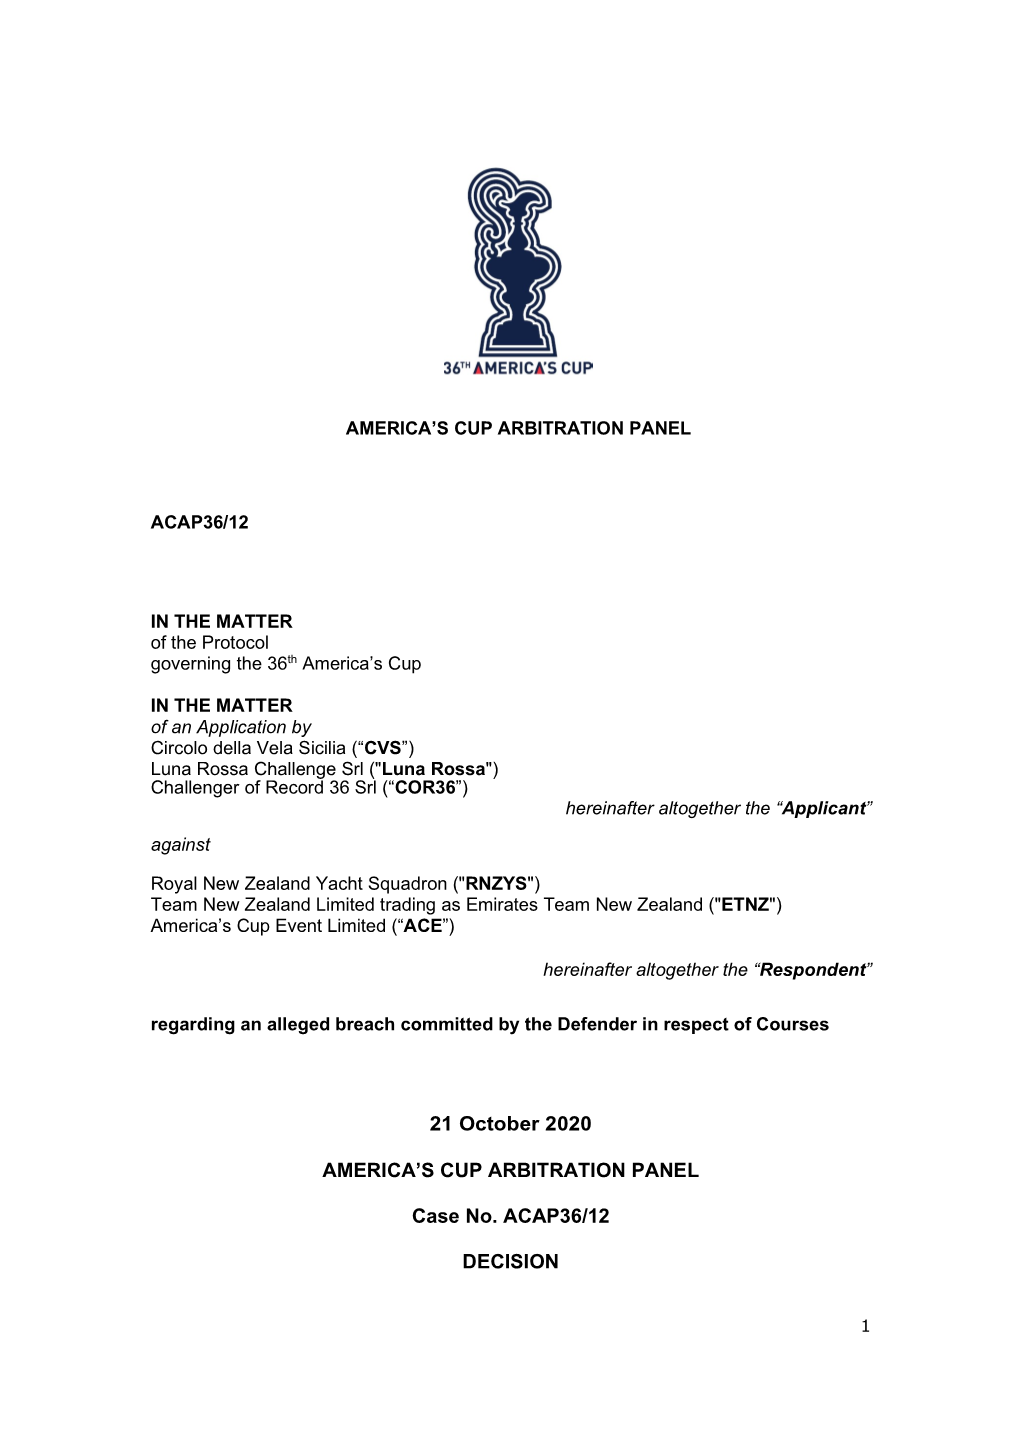 21 October 2020 AMERICA's CUP ARBITRATION PANEL Case No